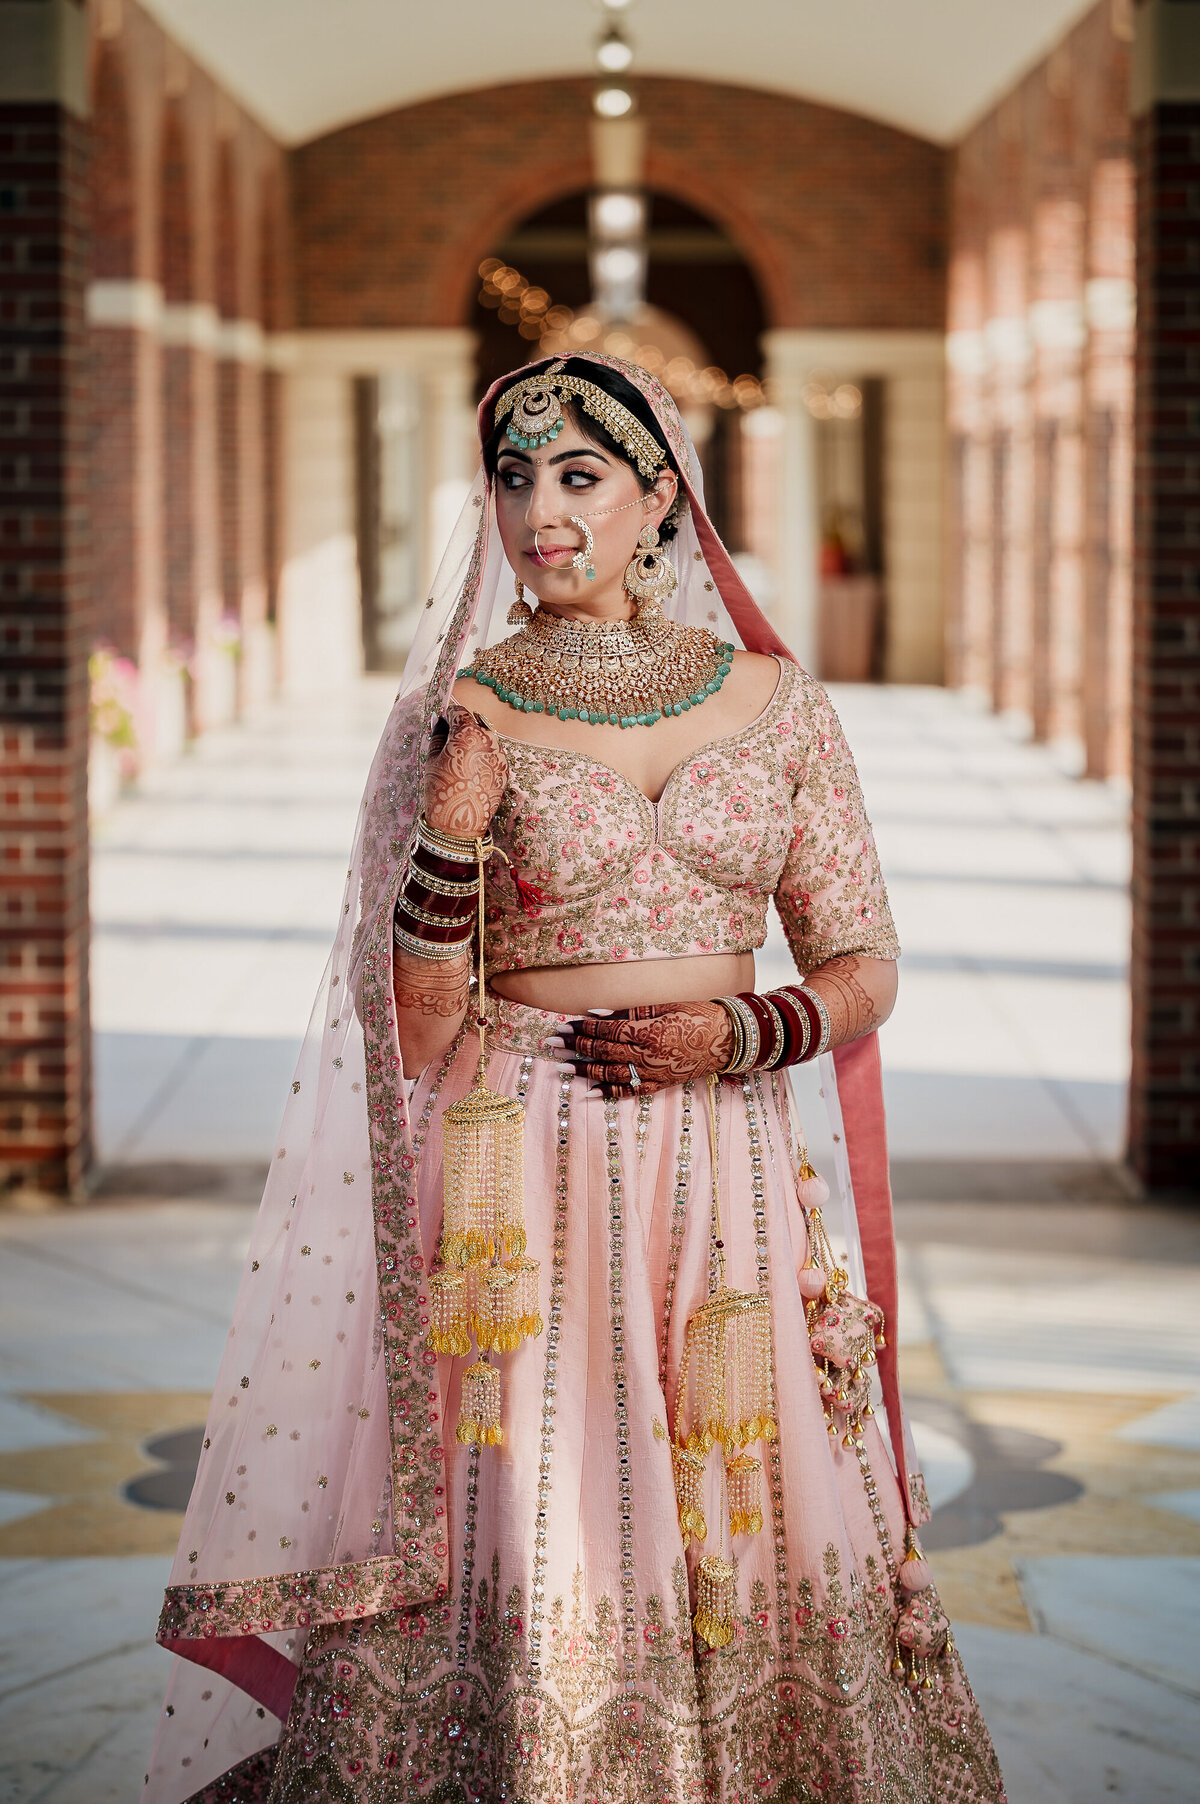 Celebrate your NYC Indian wedding with stunning photos by Ishan Fotografi.